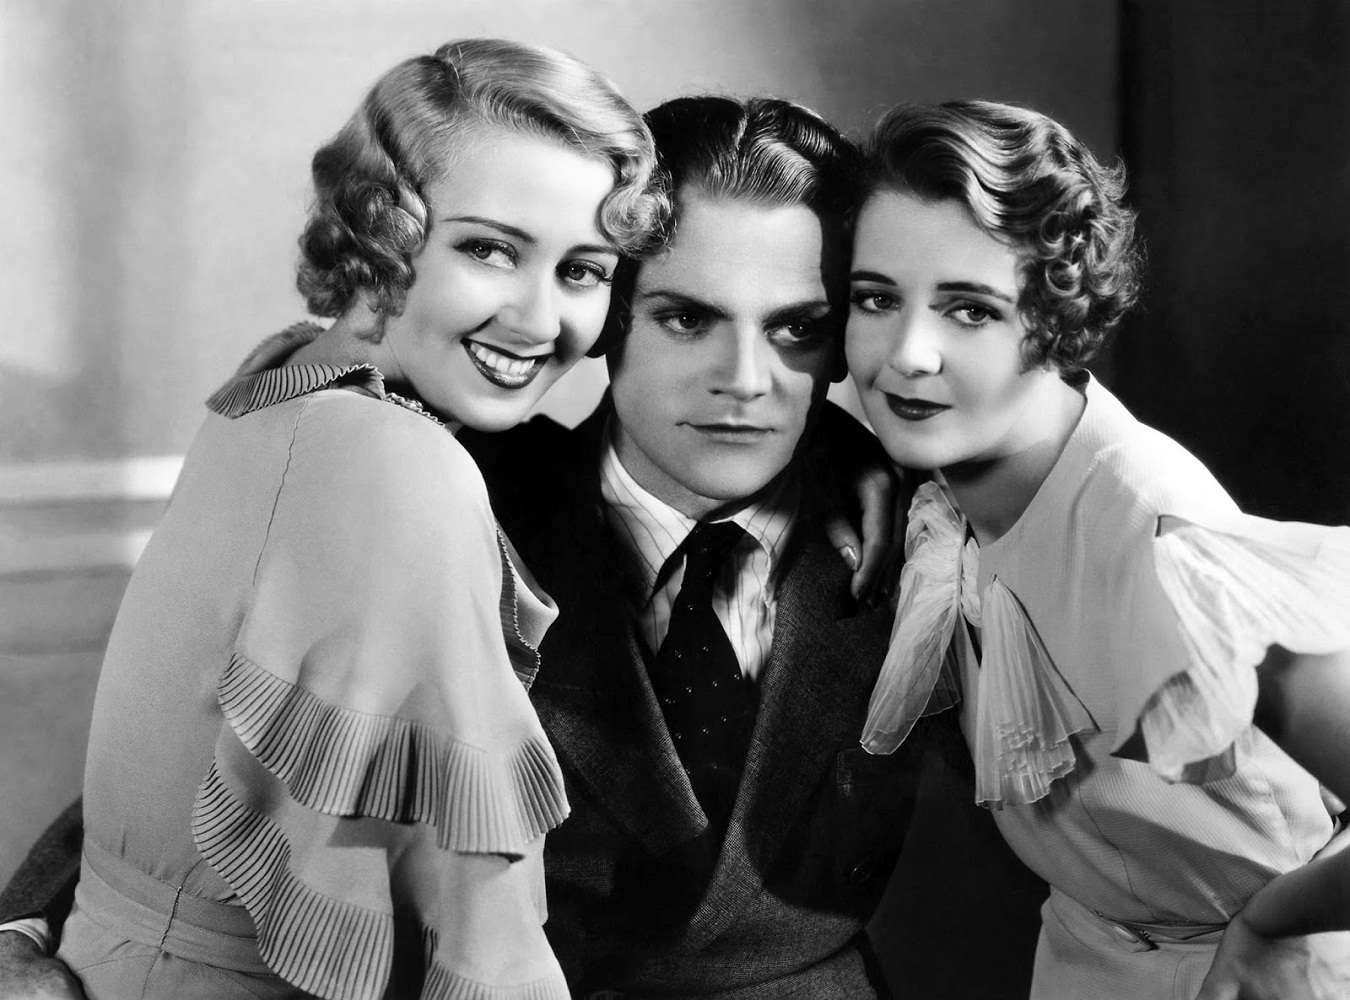 Joan Blondell, James Cagney and Ruby Keeler in Footlight parade, 1933